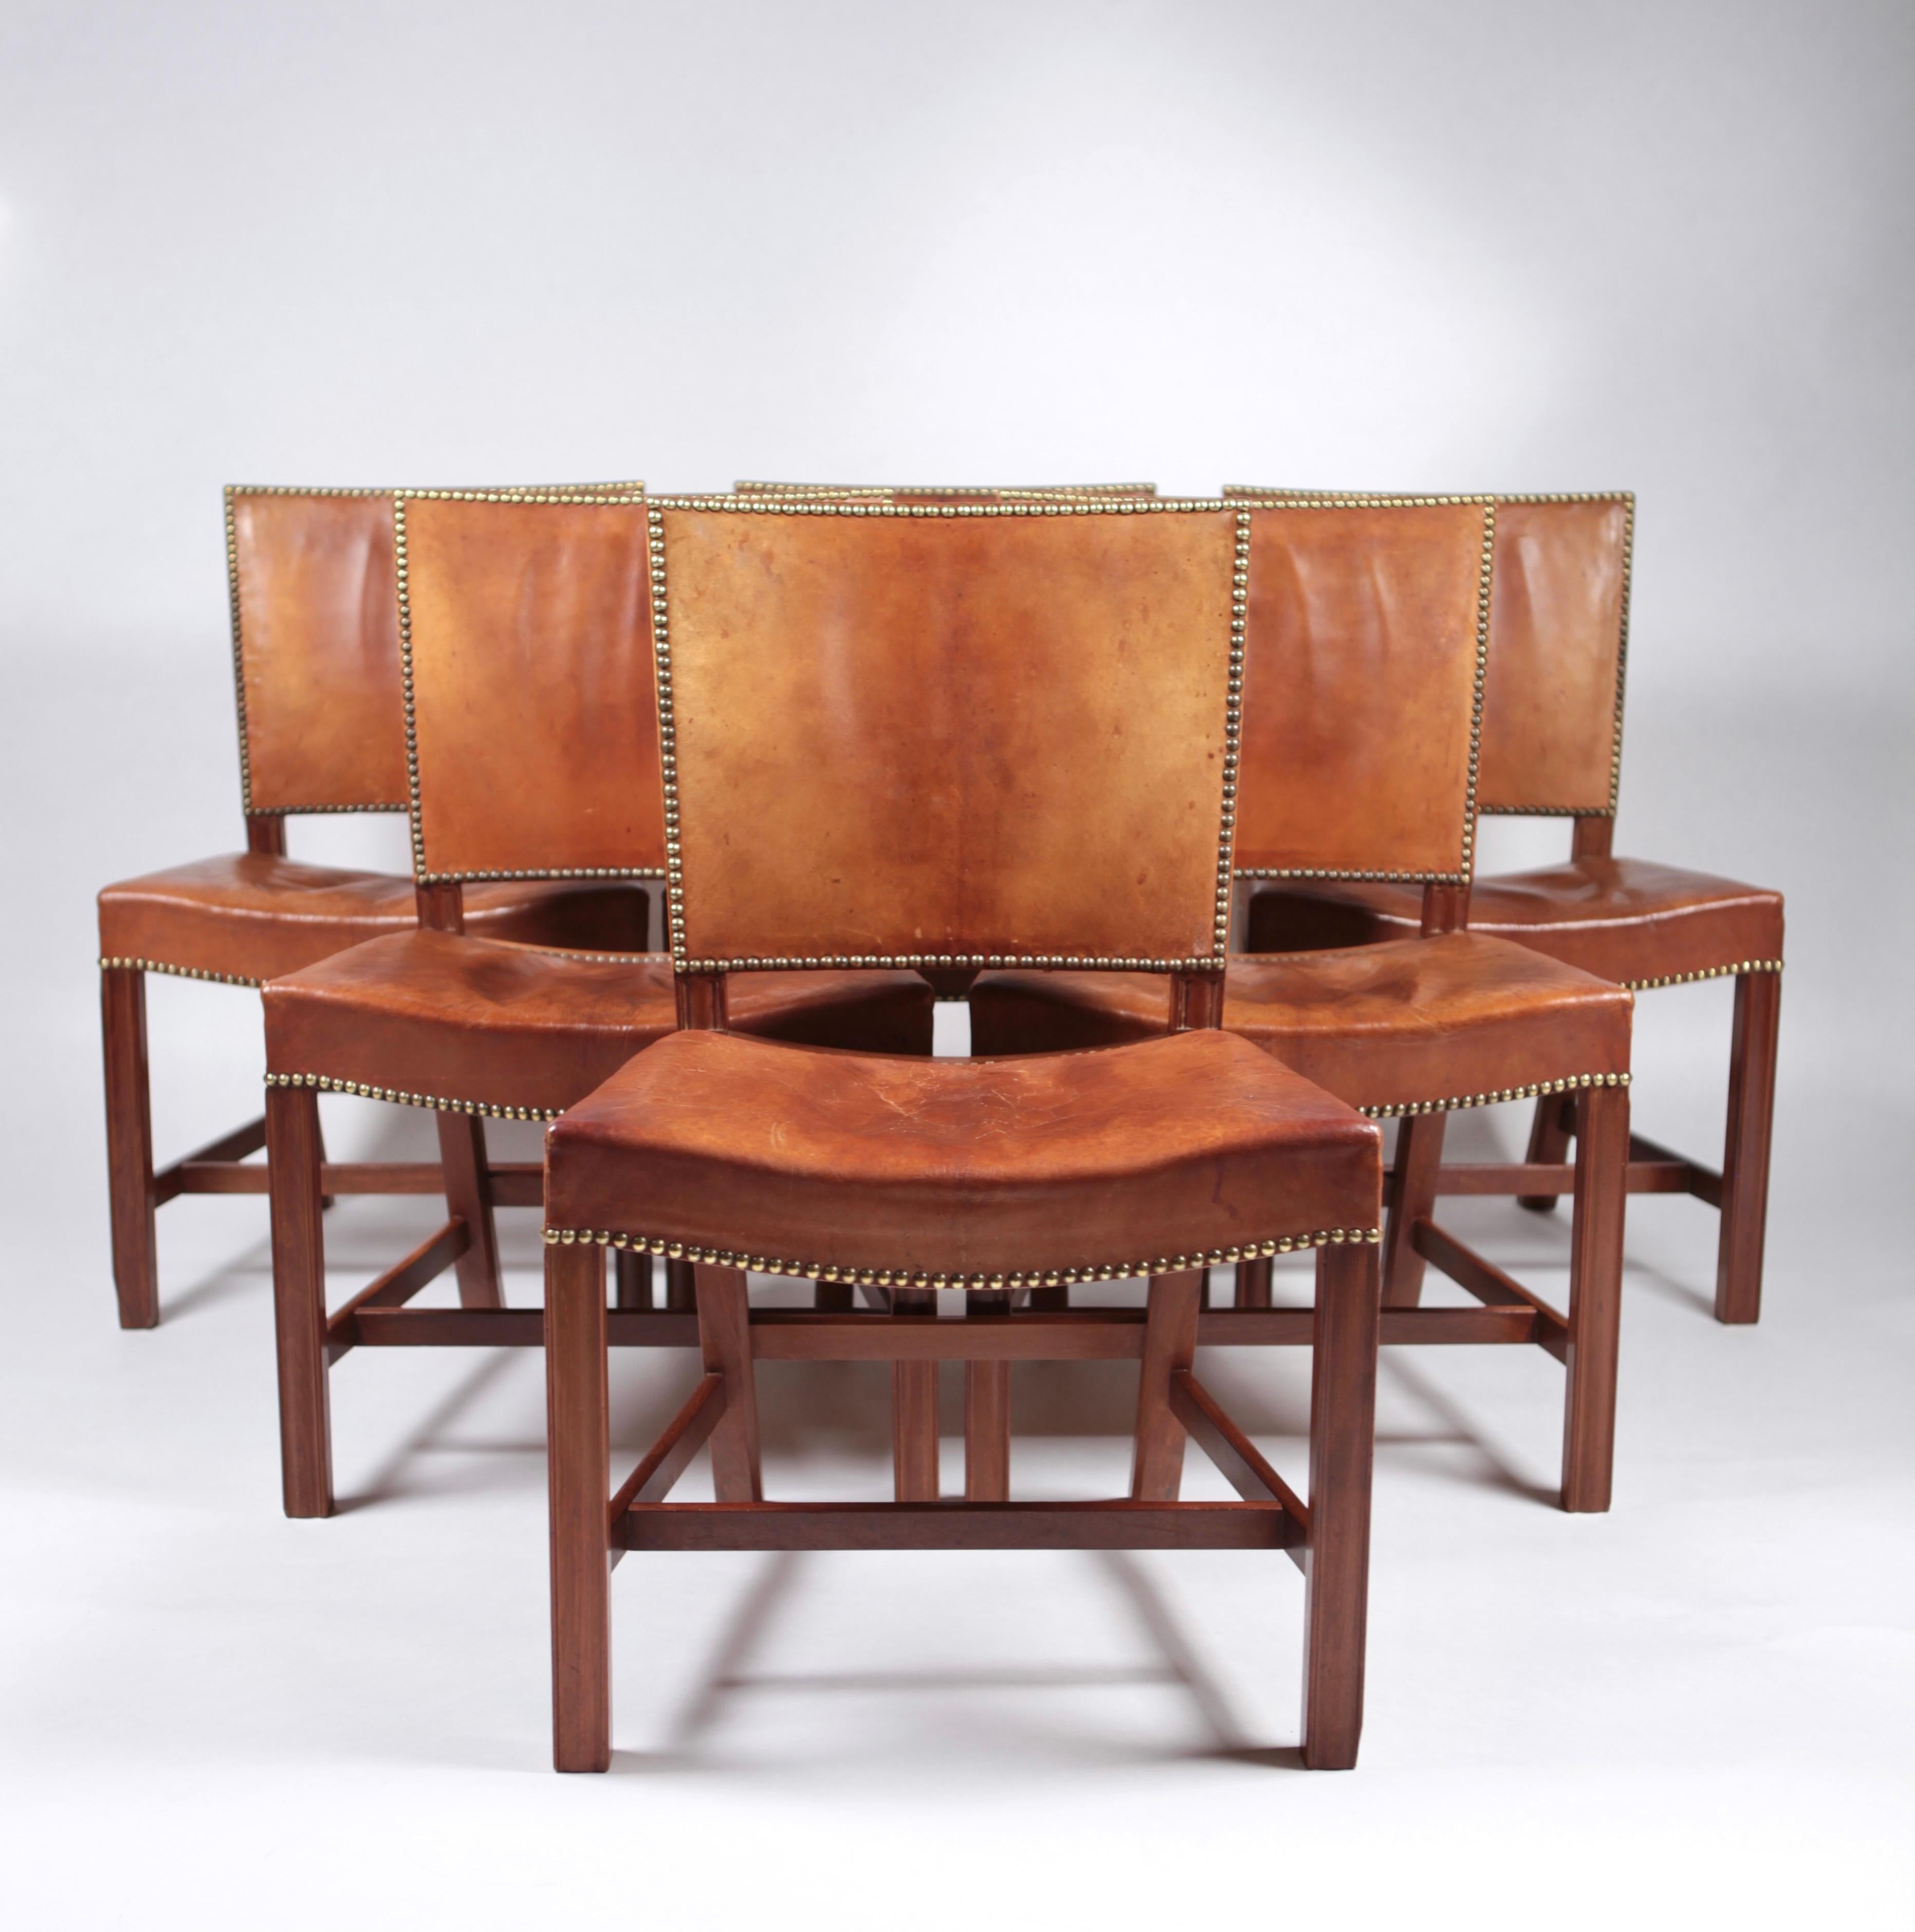 Kaare Klint,
A fantastic set of six 'Barcelona' dining chairs. Designed 1927
This set is manufactured 1932, in original, excellent condition, made of Cuban mahogany, Niger leather and brass nails.
Model 3758.
Executed by cabinetmakers Rud.